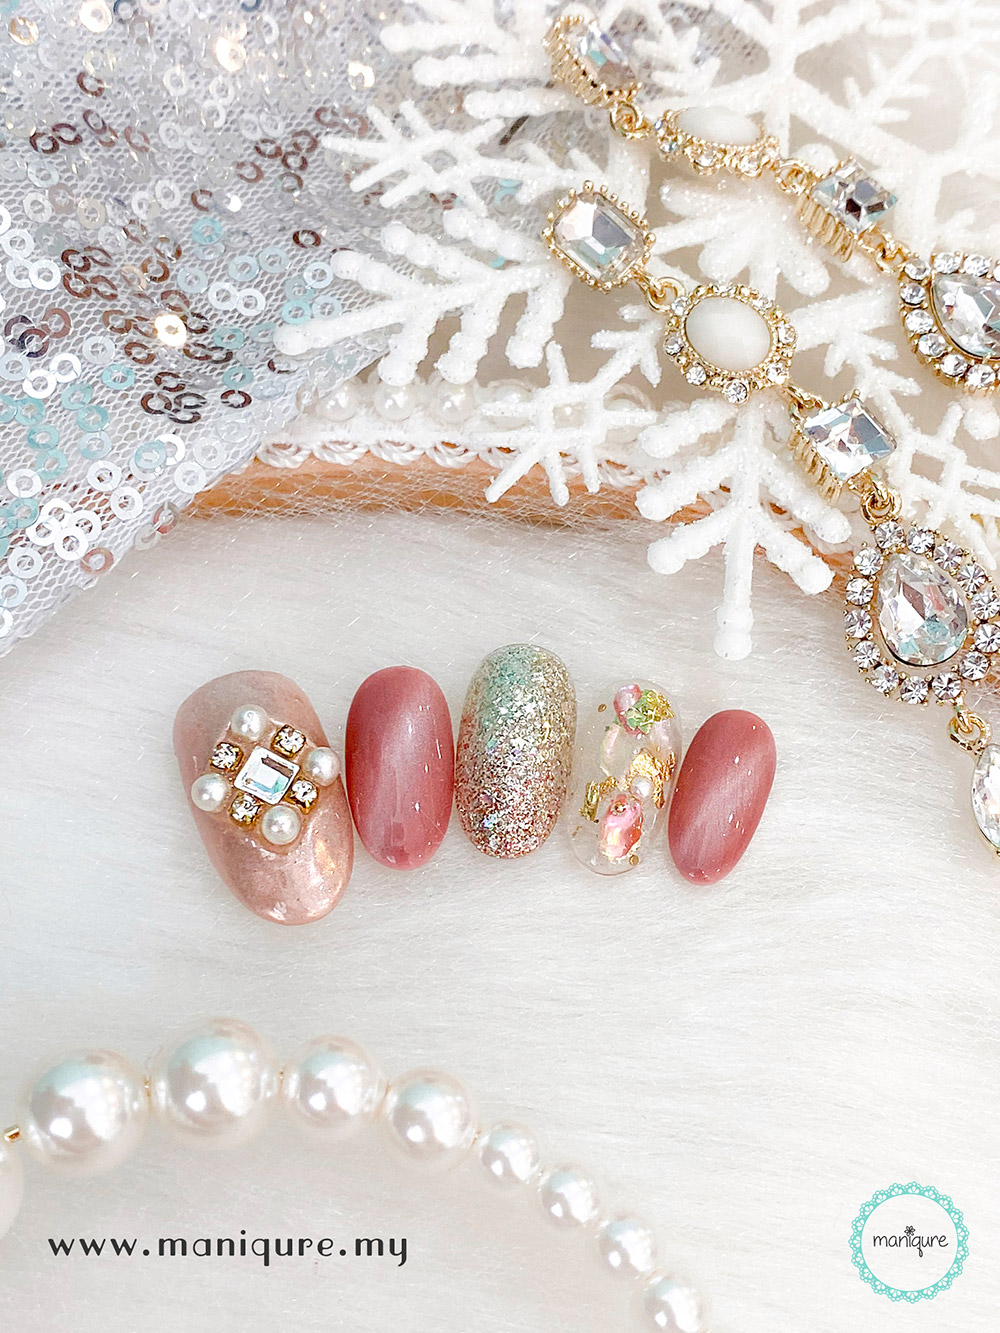 Lovely Christmas Nails